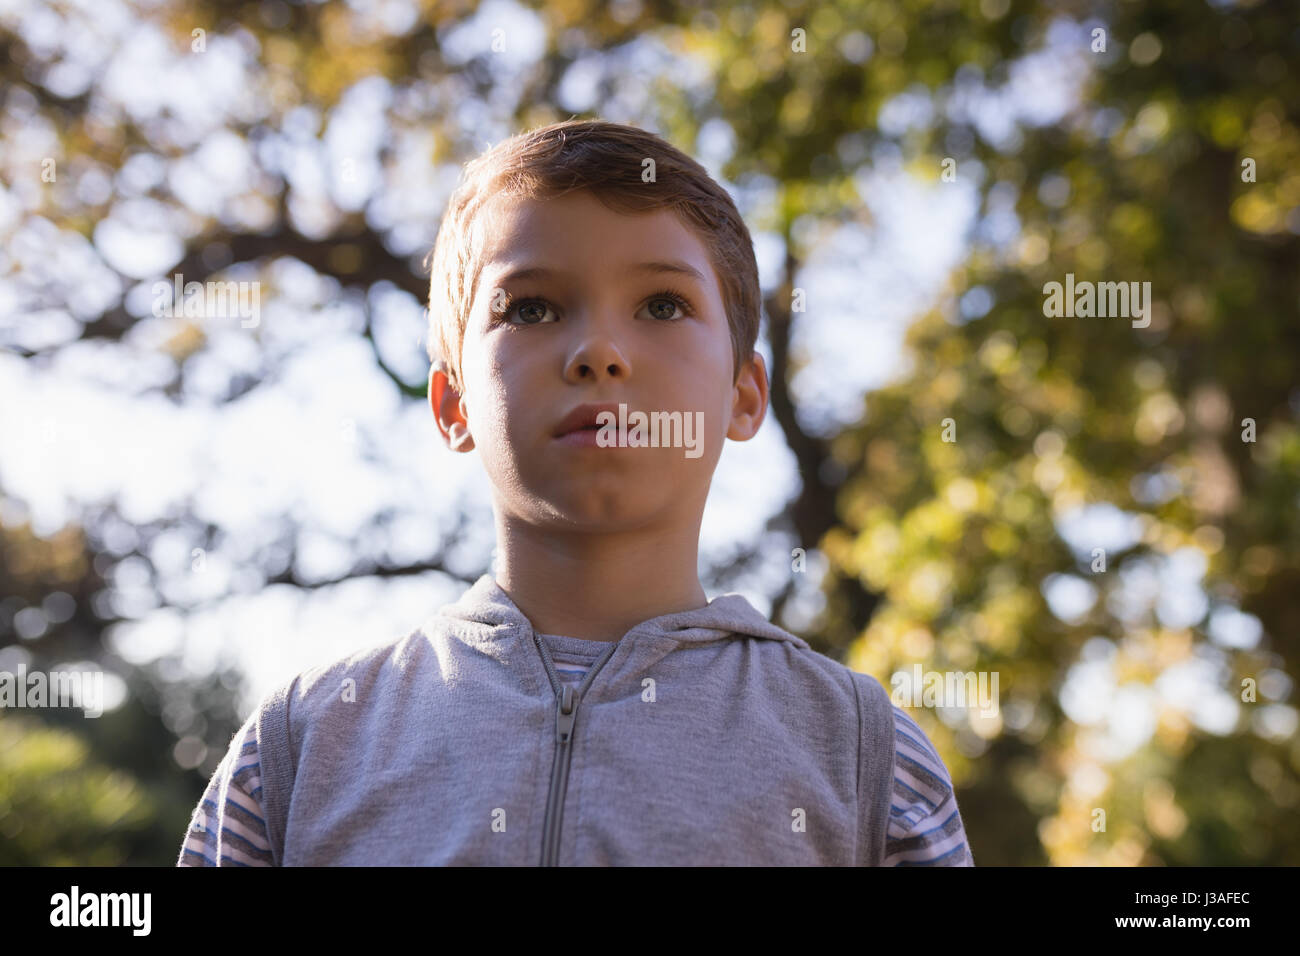 Low angle view of boy against trees in forest Stock Photo